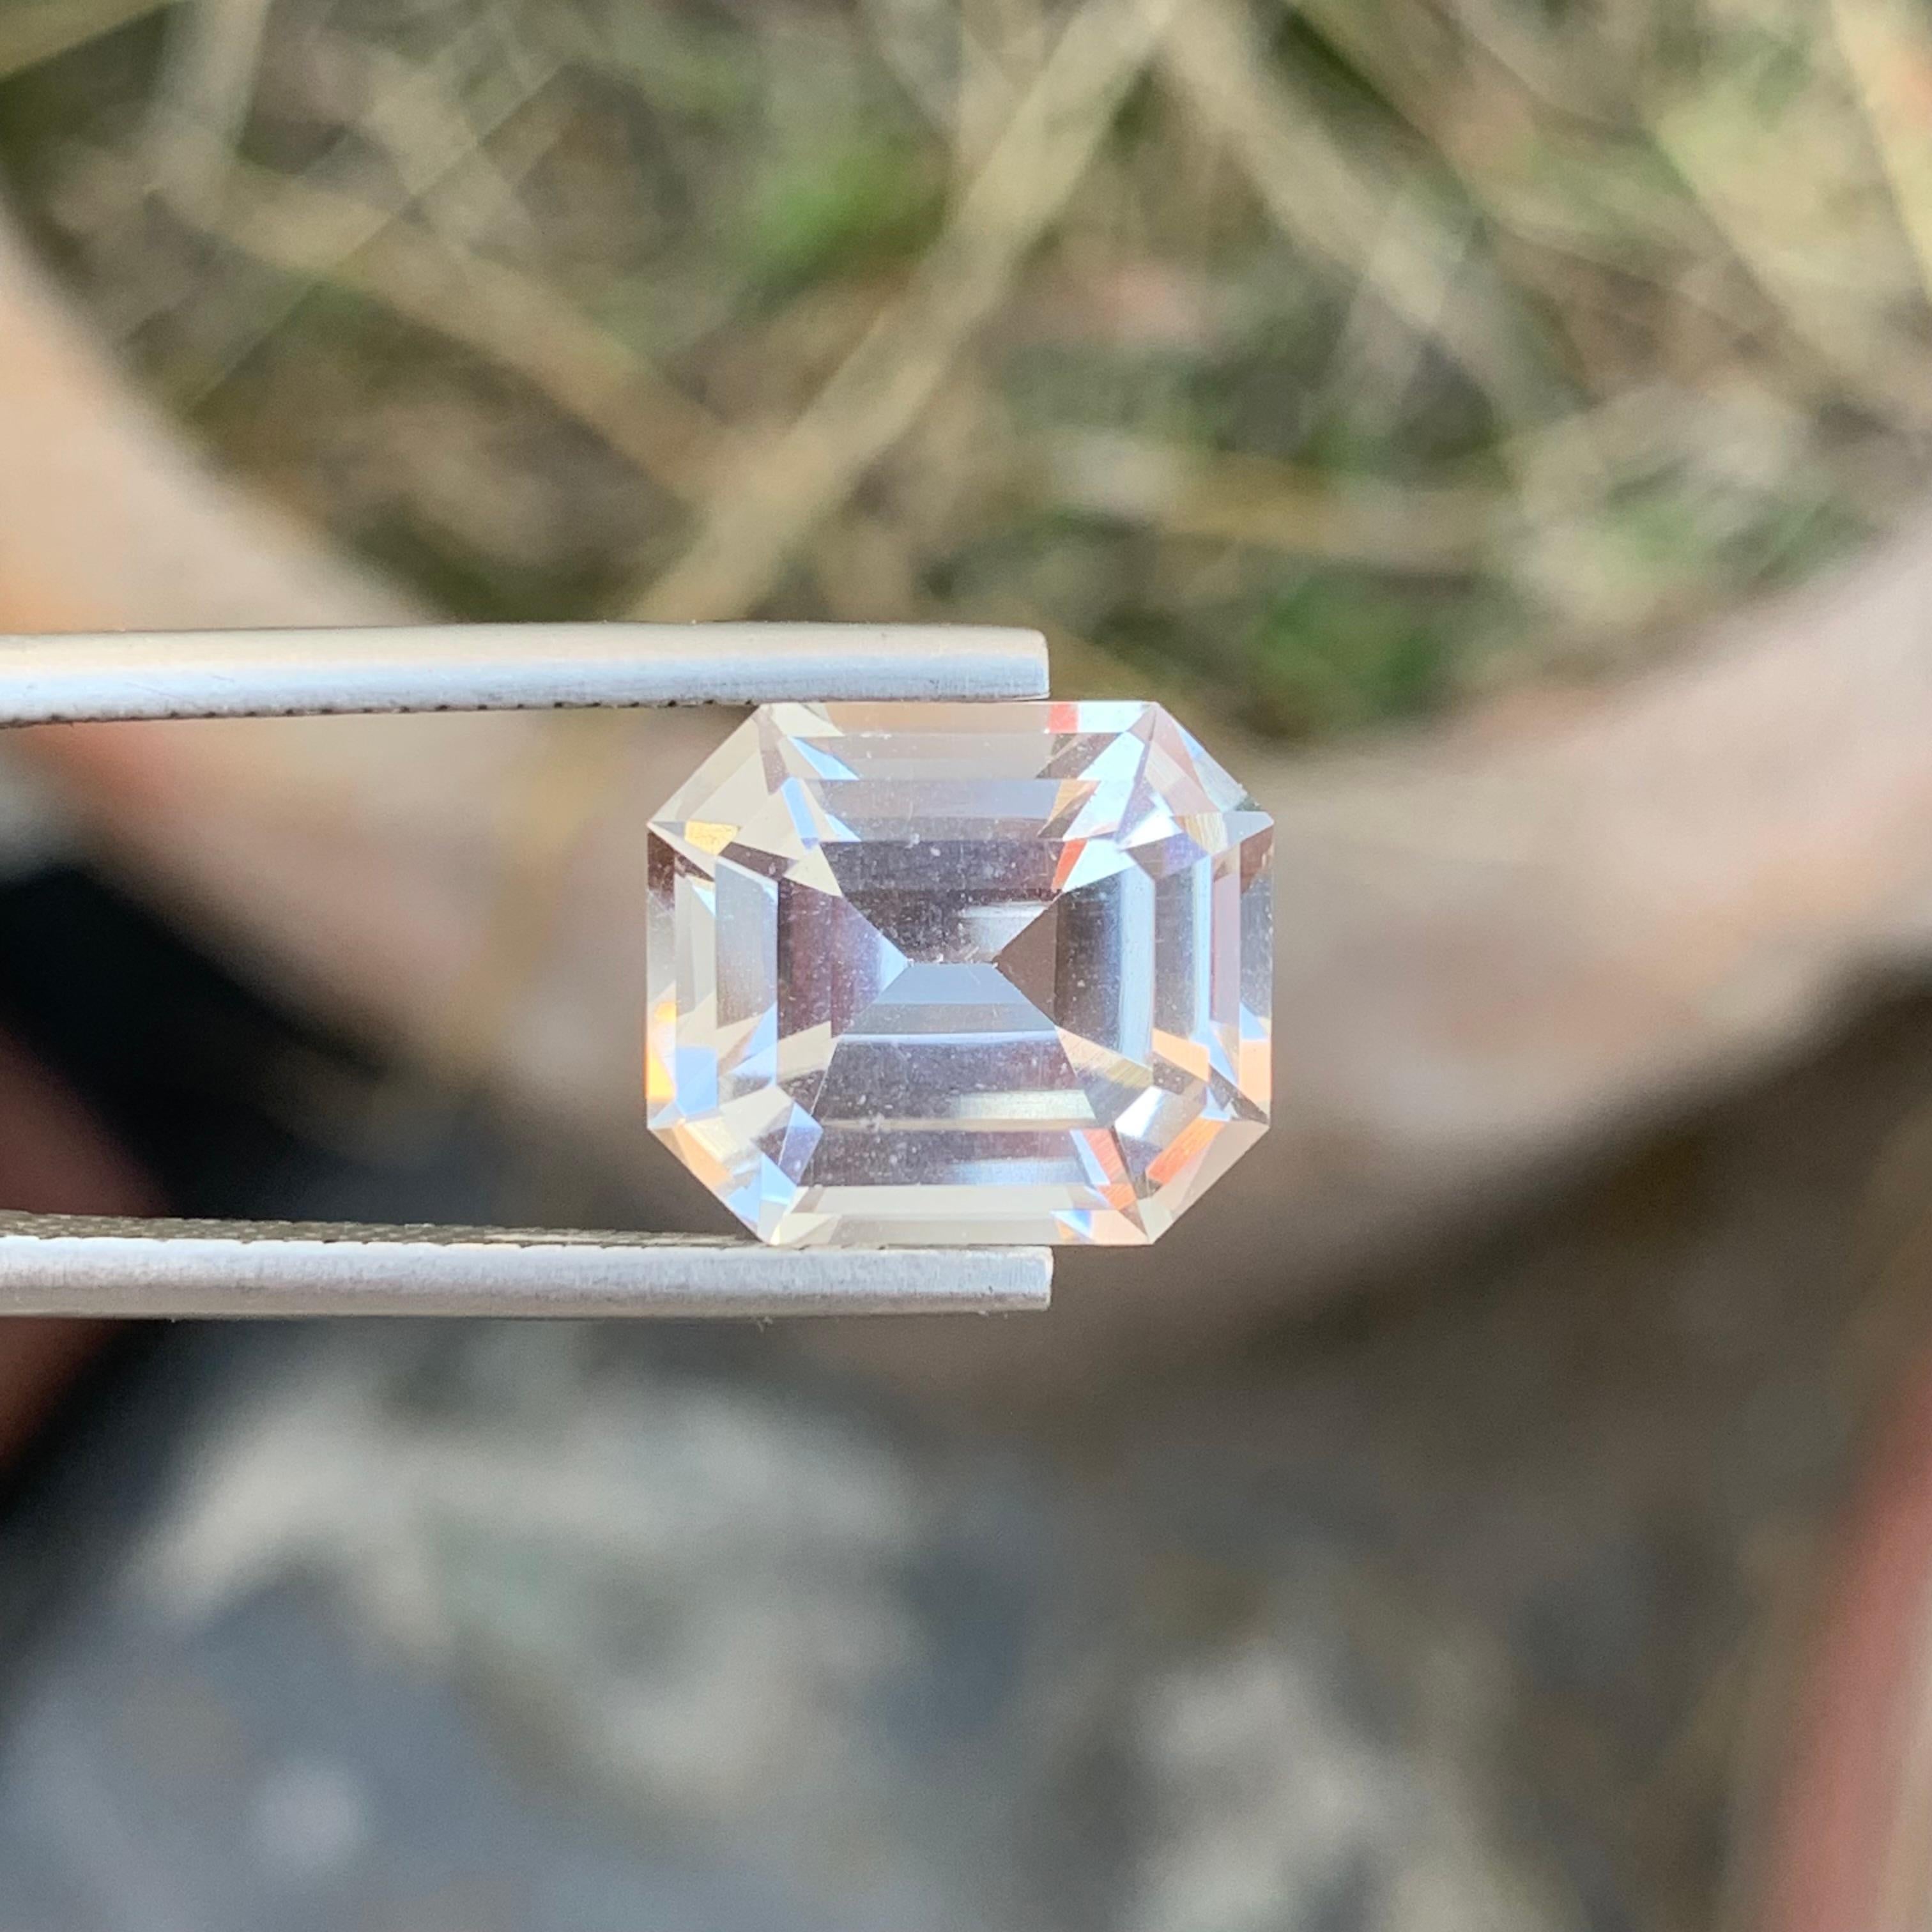 Loose Topaz
Weight: 7.40 Carats
Dimension: 12.2 x 10.6 x 7.1 Mm
Origin: Skardu, Pakistan
Shape: Asscher
Color: Golden
Treatment: Non
Certificate: On Demand

Golden Topaz is a radiant gemstone renowned for its warm, honey-colored hues. Its name is